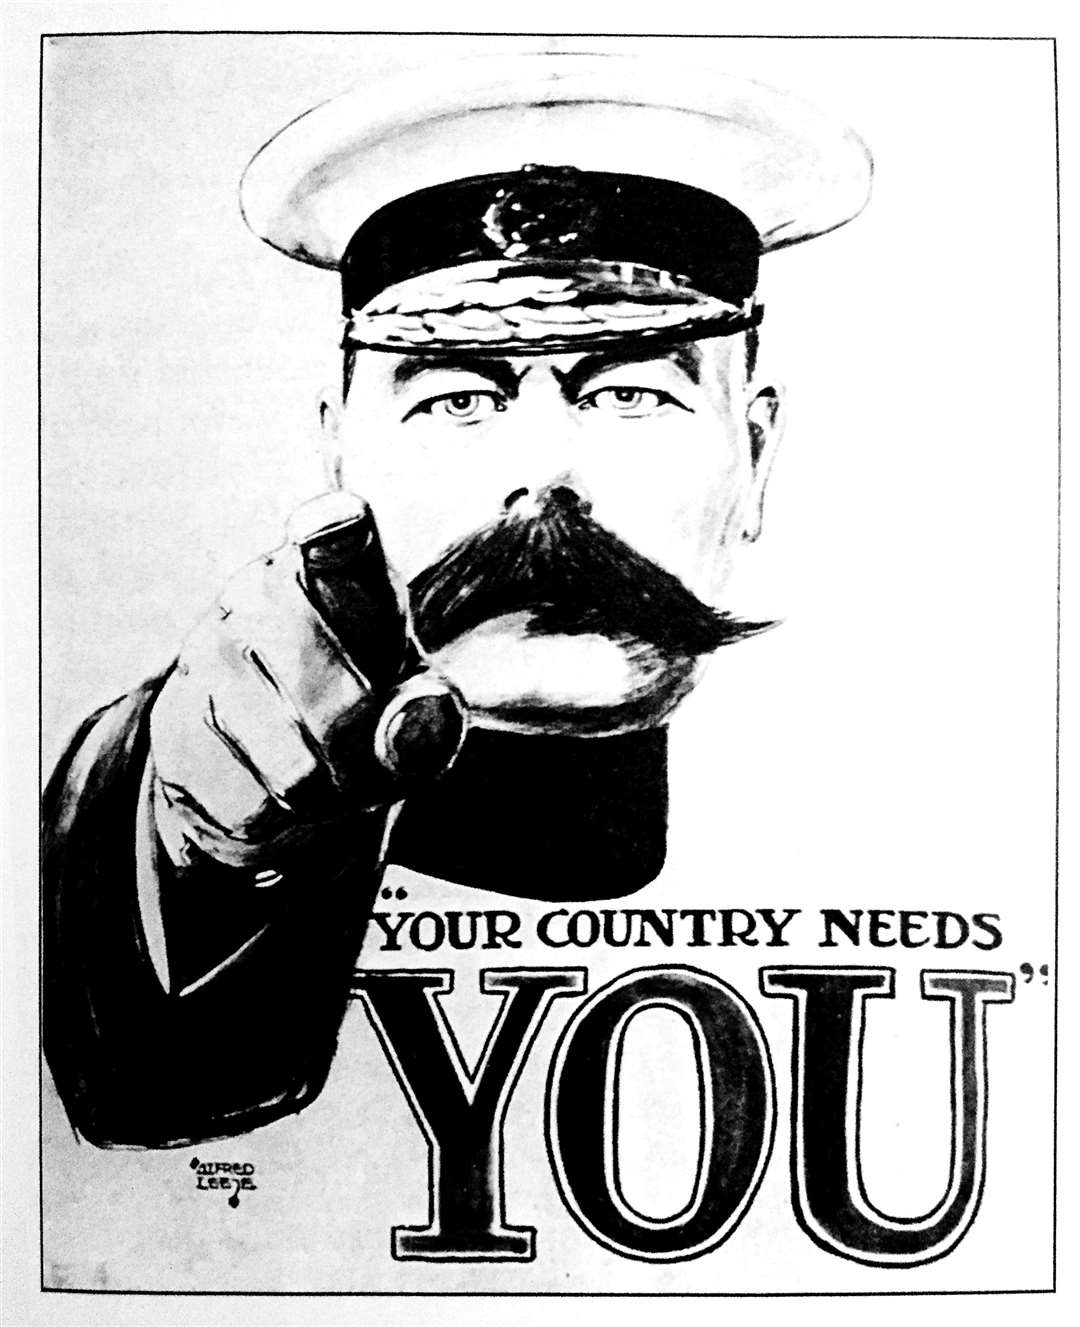 Lord Kitchener in the famous 'Your Country Needs You' poster